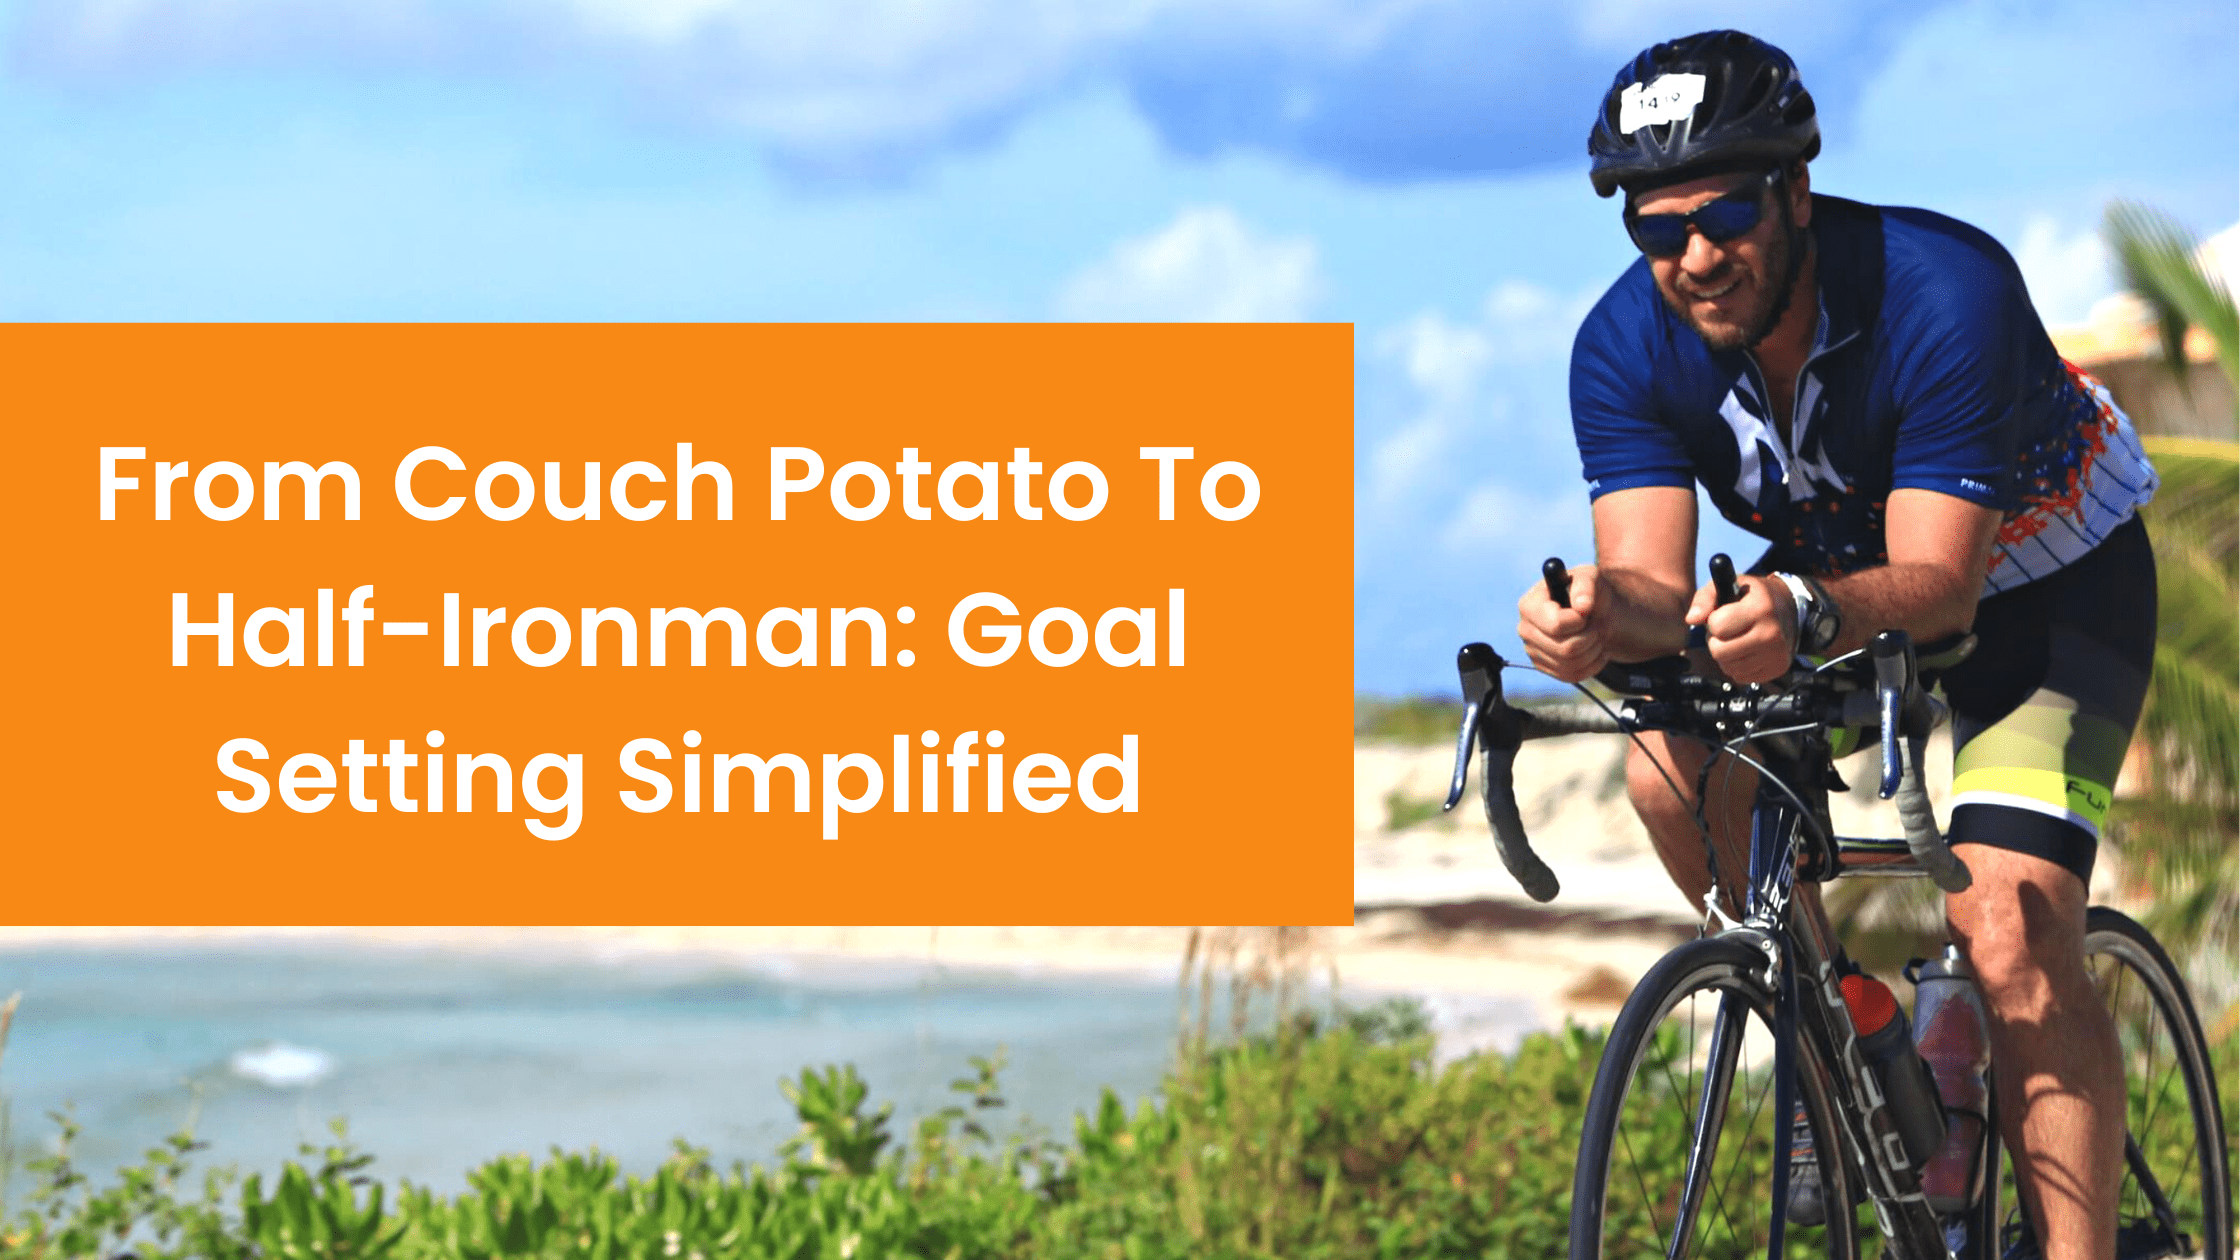 From Couch Potato To Half-Ironman: Goal Setting Simplified